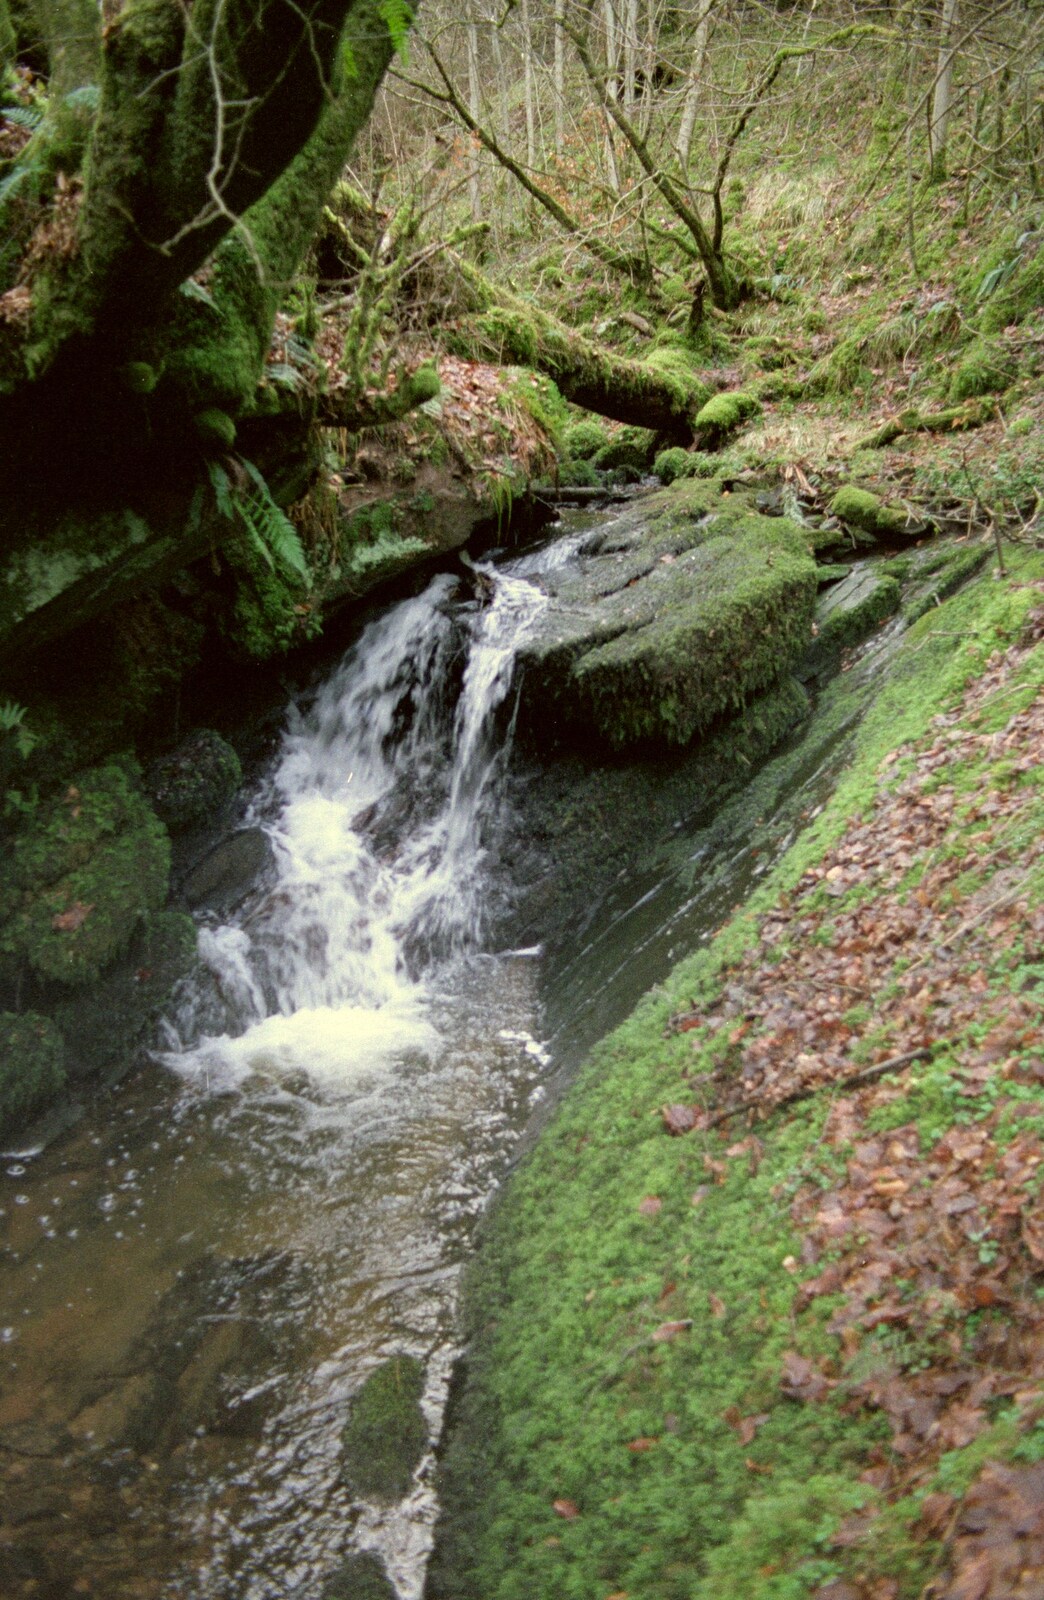 A babbling brook on the way to Gartocharn from Sandbach to Loch Lomond, Cheshire and Scotland - 10th December 1987